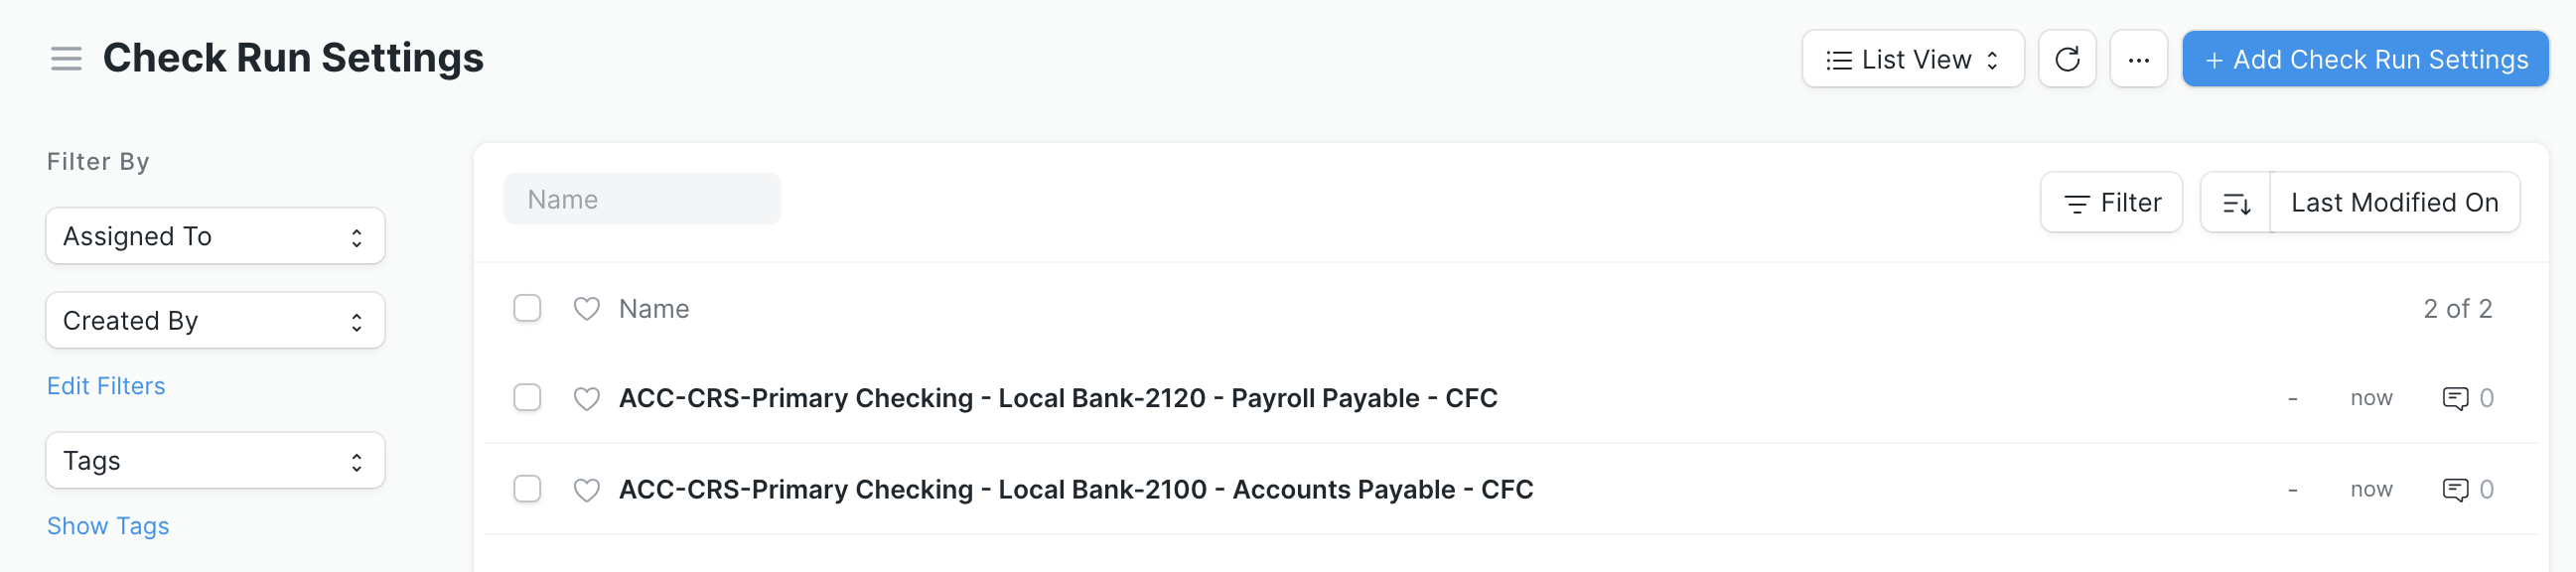 Screen shot of the Check Run Settings listview with two entries - one for the Local Bank and Payroll Payable combination and the other for the Local Bank and Accounts Payable combination.